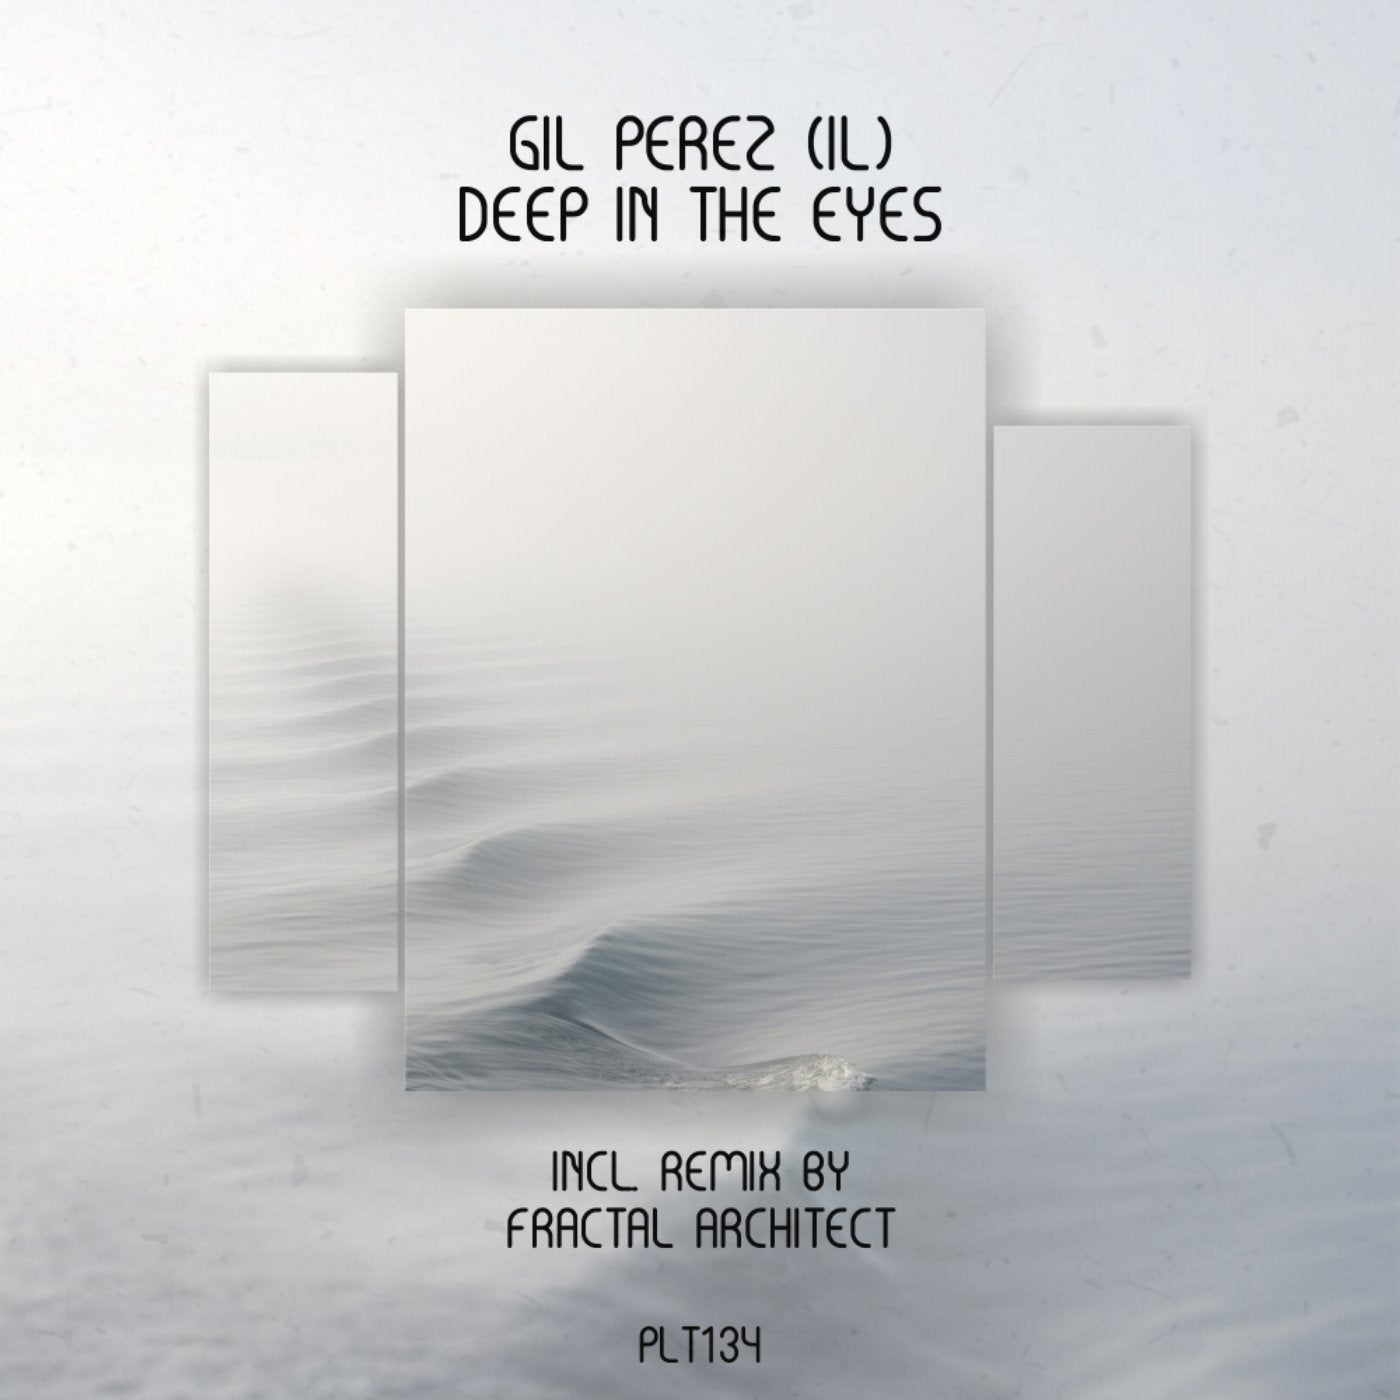 Deep in the Eyes EP (Incl. Remix by Fractal Architect)